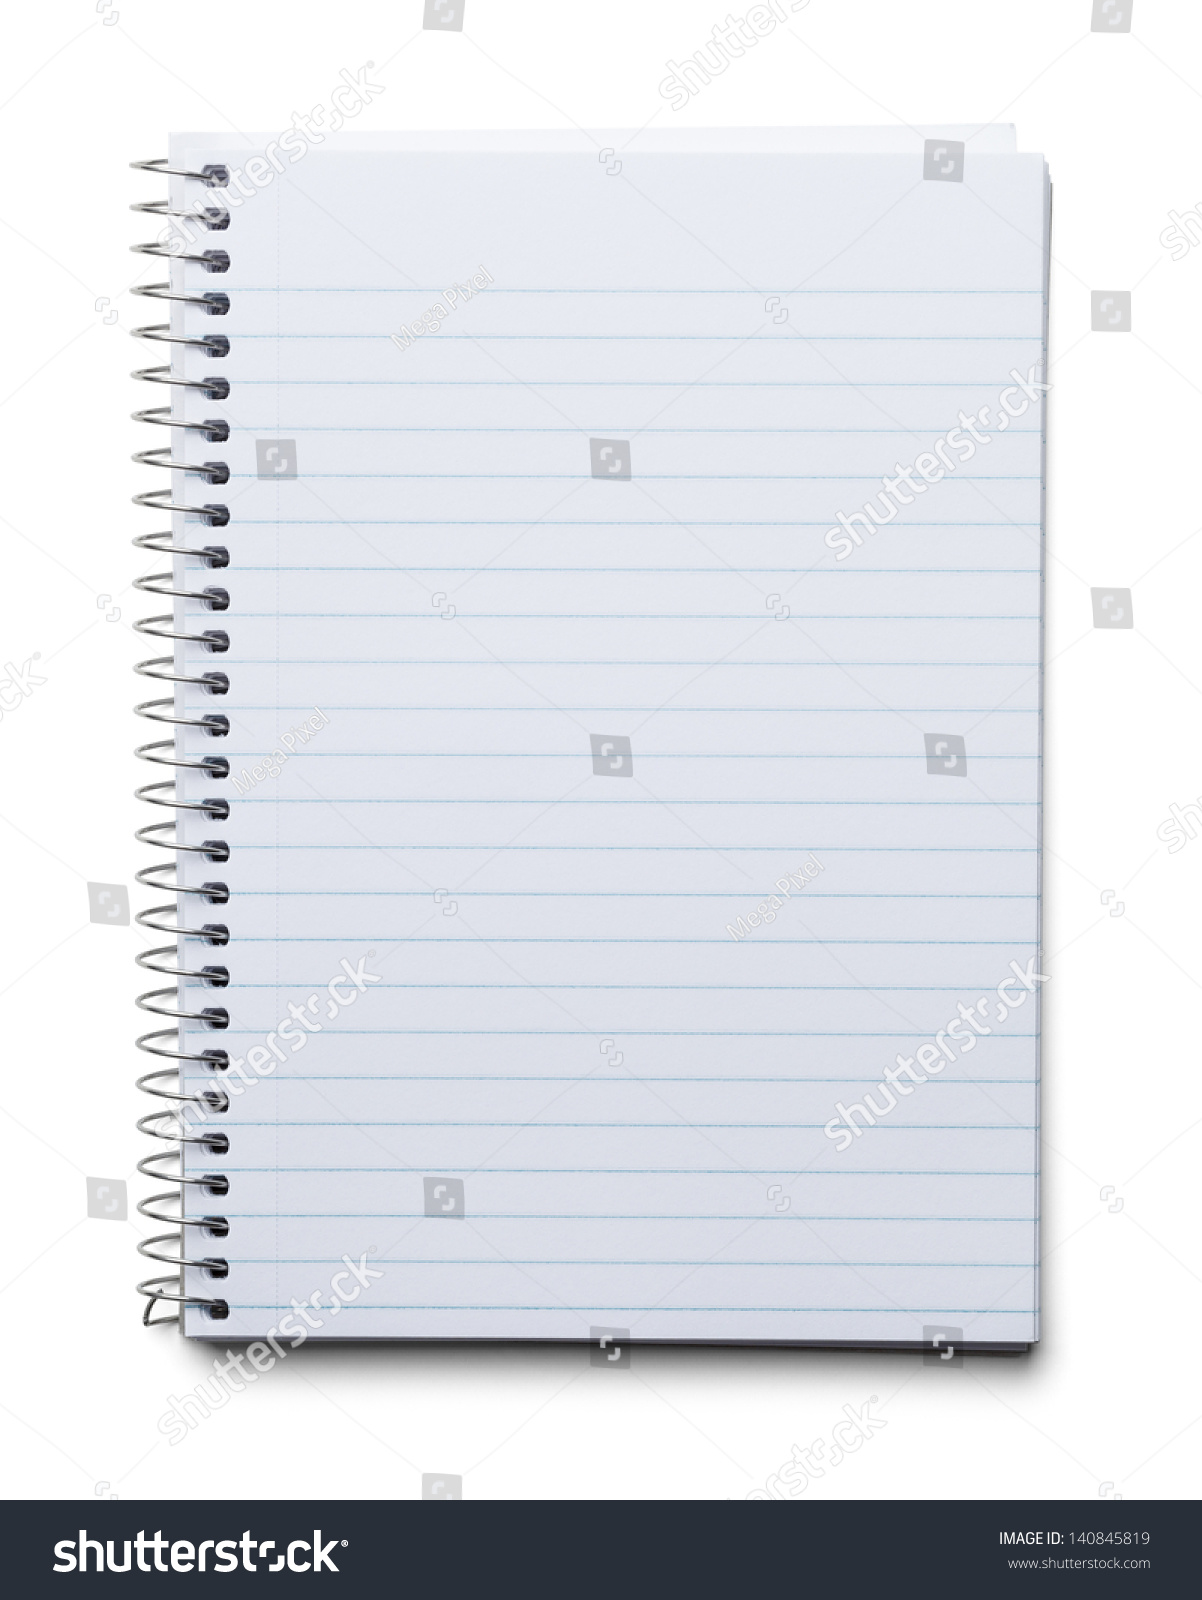 Blank Spiral Notebook With Line Paper Isolated On A White Background ...